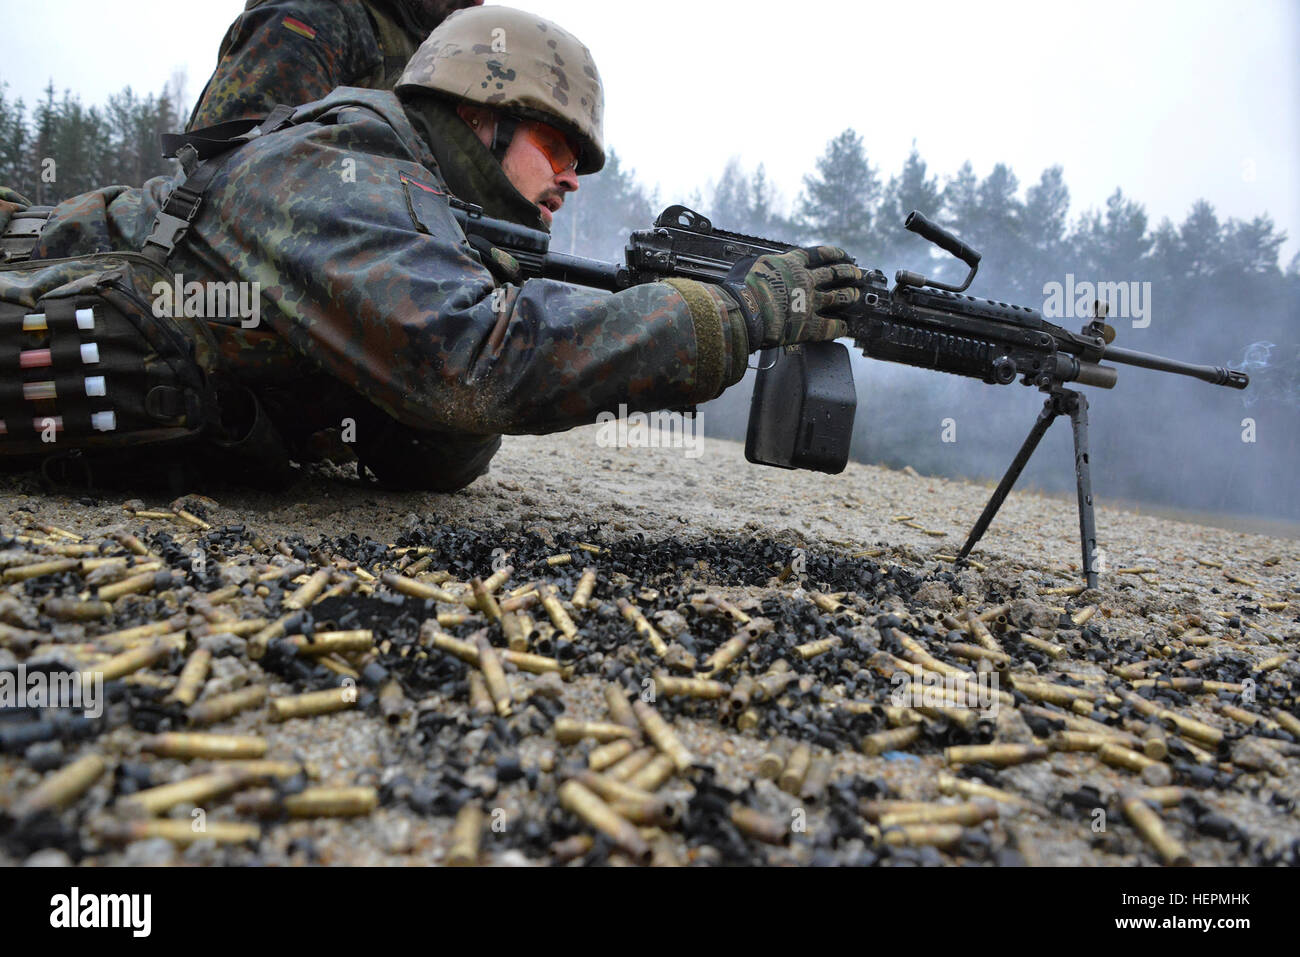 A German soldier fires a M249 light machine gun during a familiarization training on U.S. weapons at the 7th Army Joint Multinational Training Command Grafenwoehr Training Area, Germany, Dec. 9, 2015. (U.S. Army photo by Visual Information Specialist Gertrud Zach/released) CATC trains German soldiers on US weapons 151209-A-HE359-0217 Stock Photo